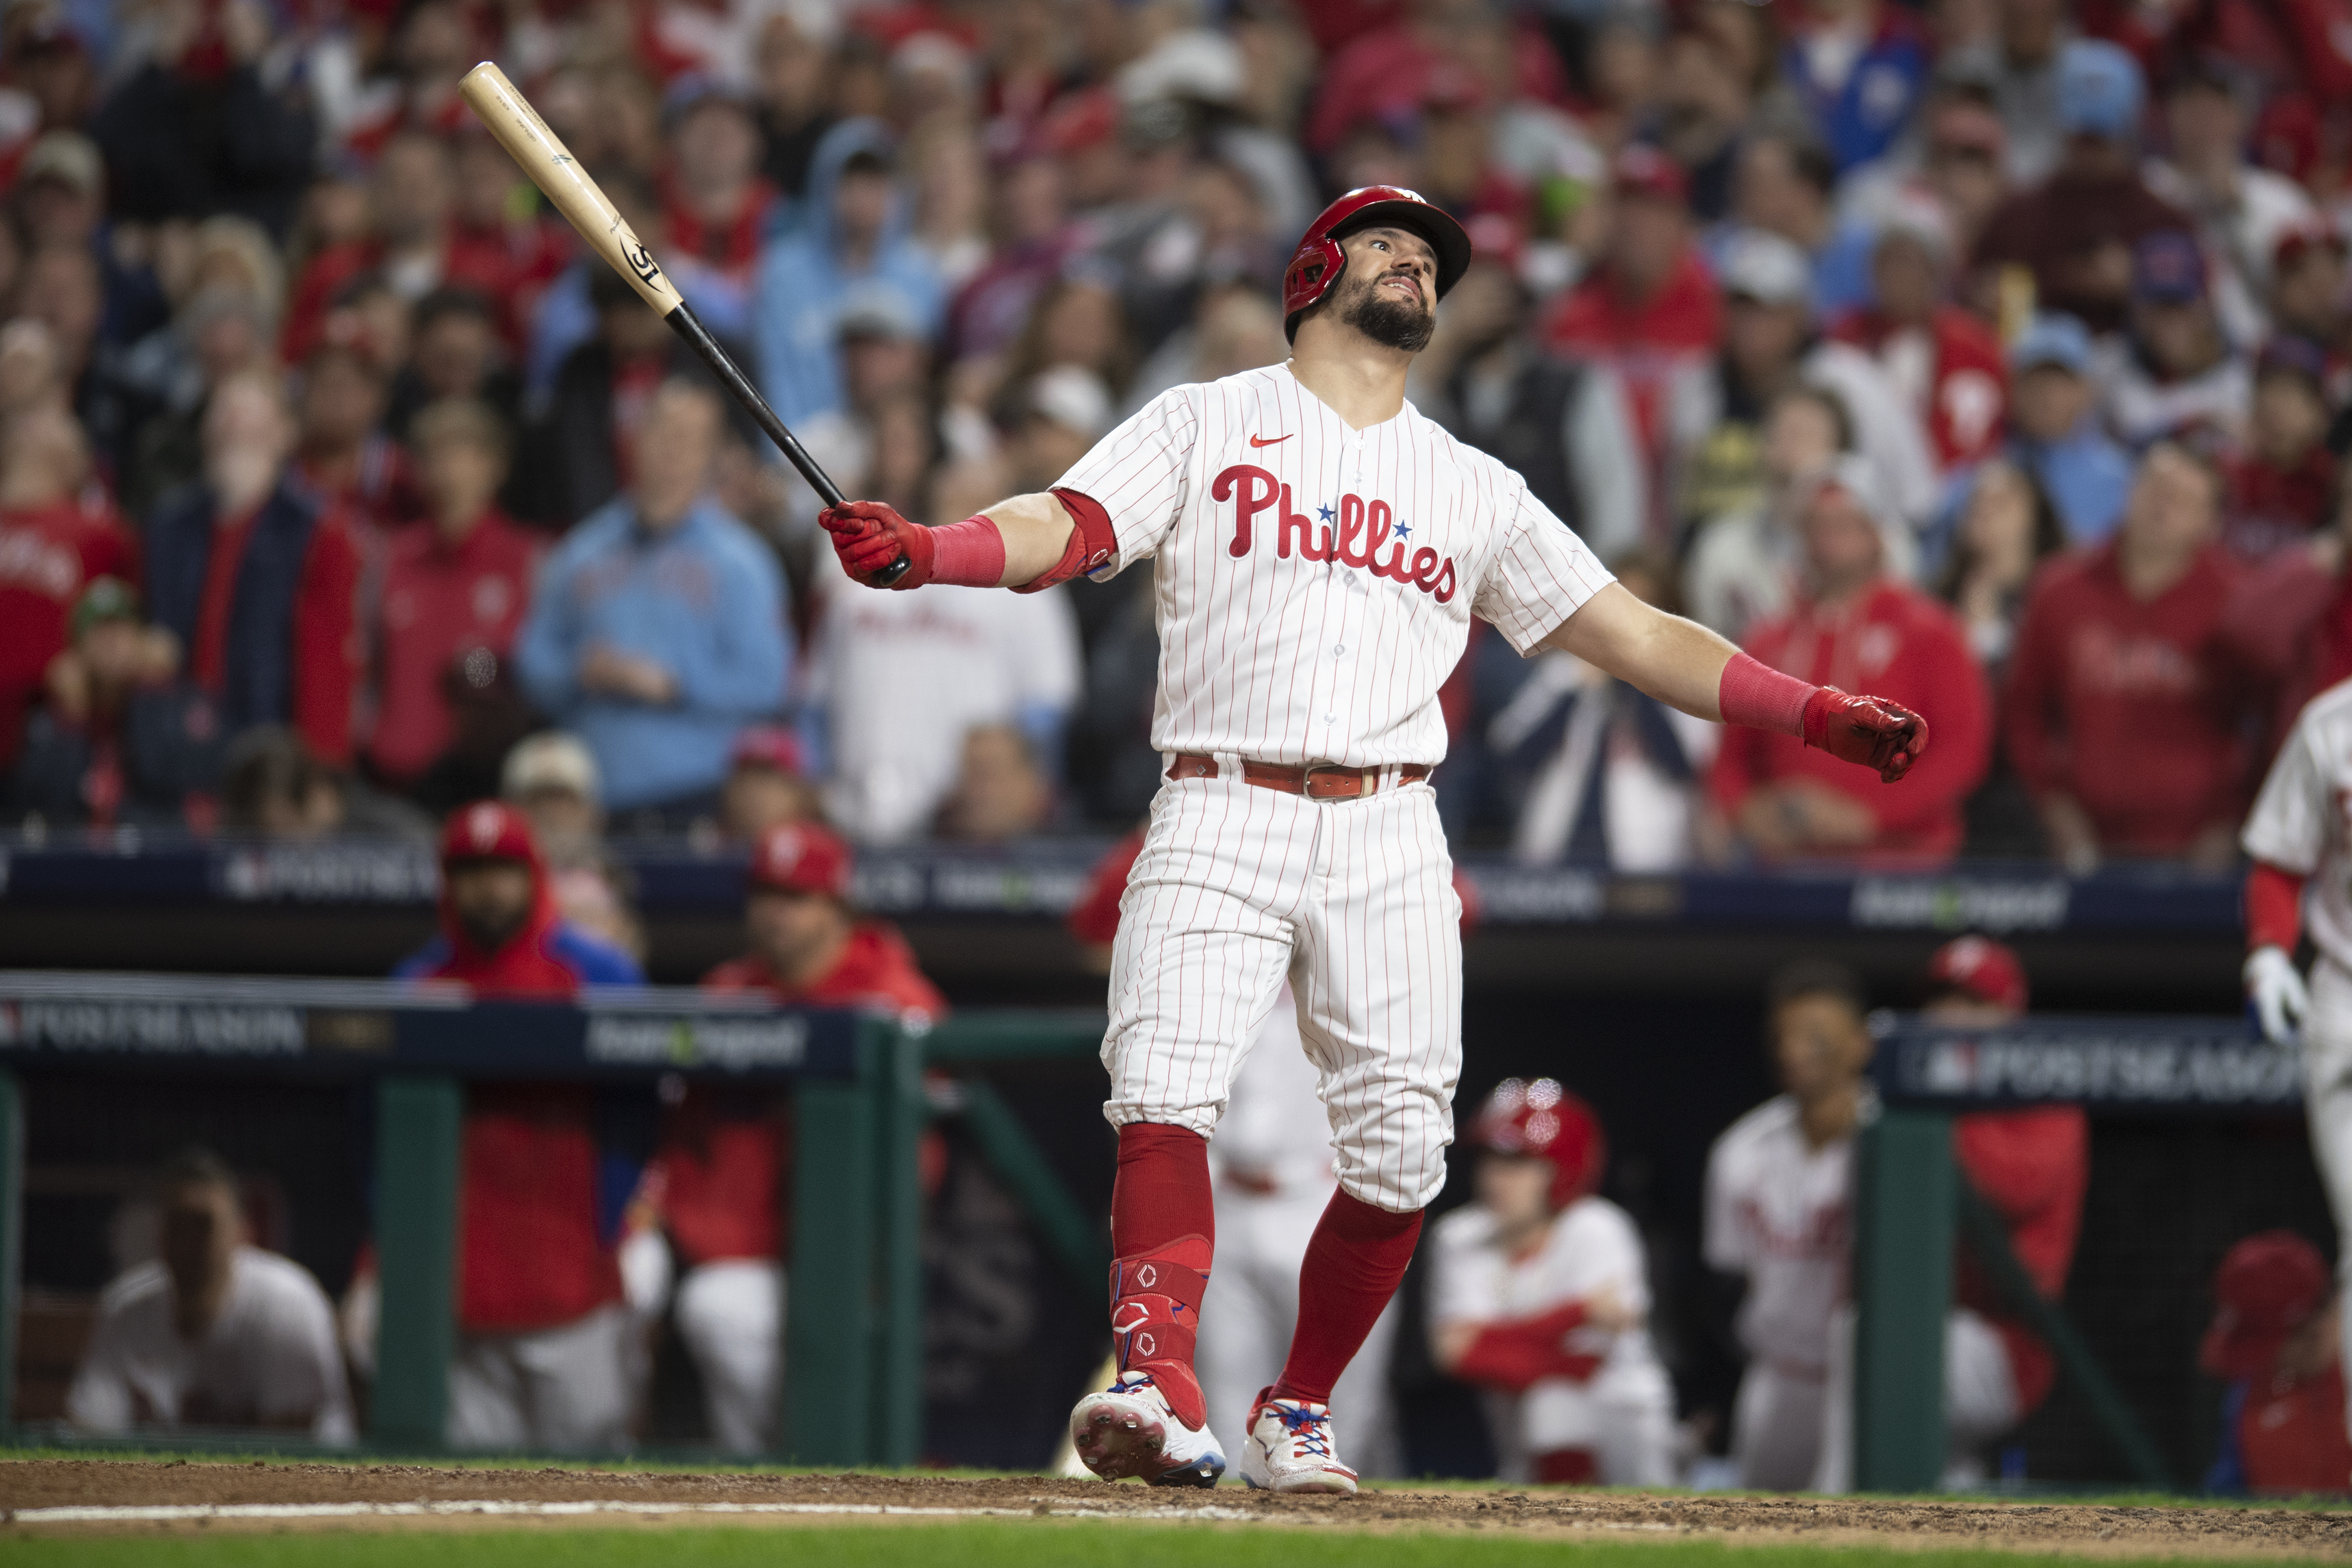 Kyle schwarber appreciation post: despite his struggles he's still my  favorite baseball player and he will be for a long time. : r/phillies